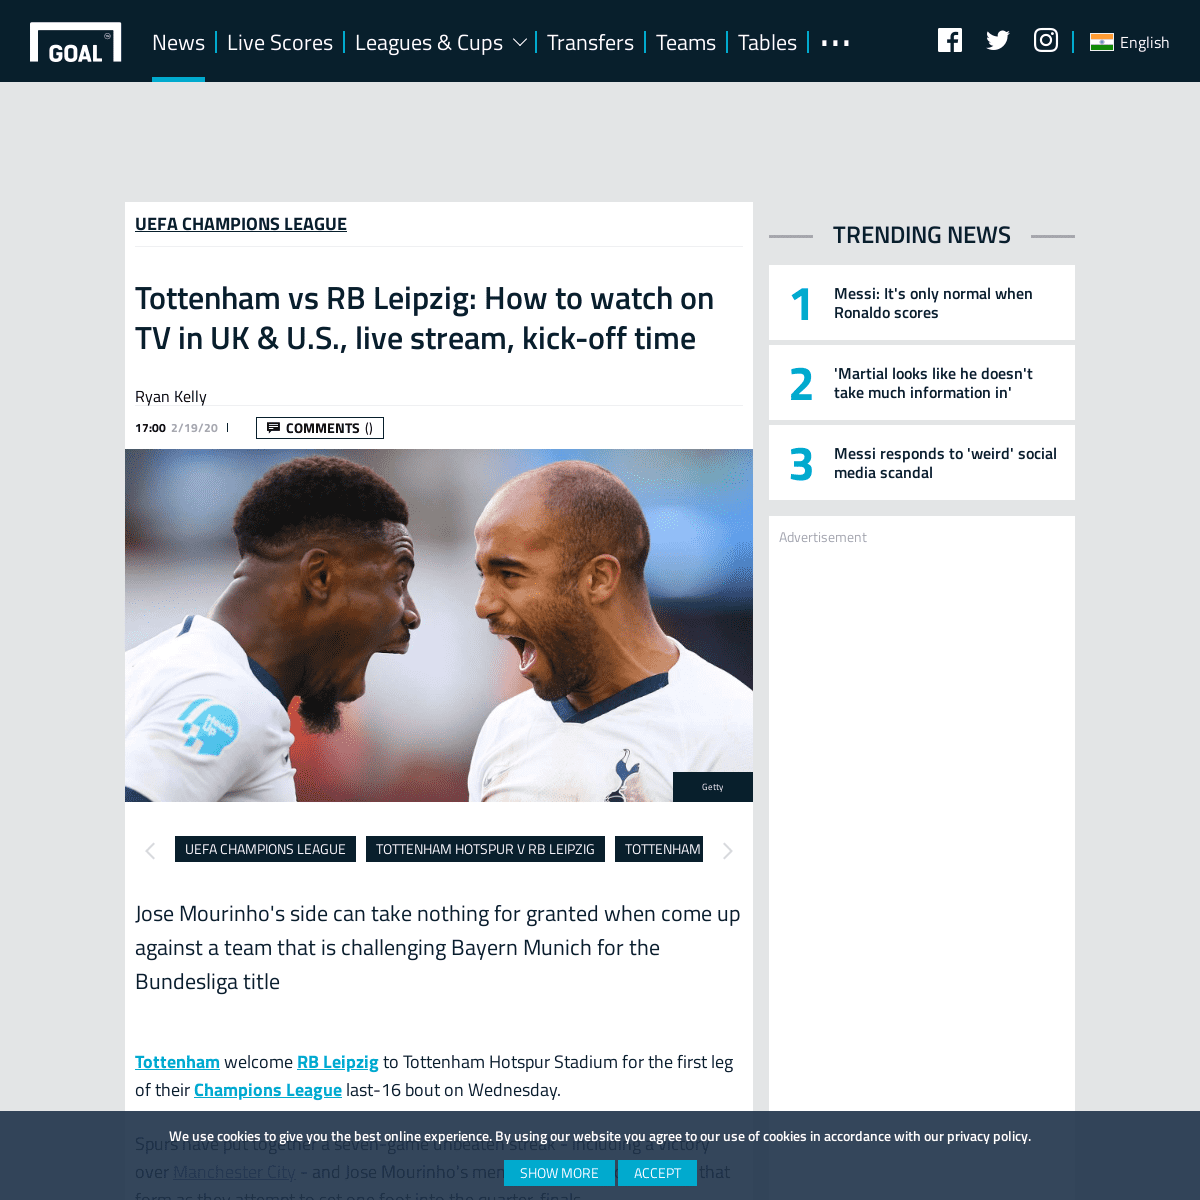 A complete backup of www.goal.com/en-in/news/tottenham-vs-rb-leipzig-how-to-watch-on-tv-uk-us-live-stream/ogf6ykybbkpd1tubk6006p